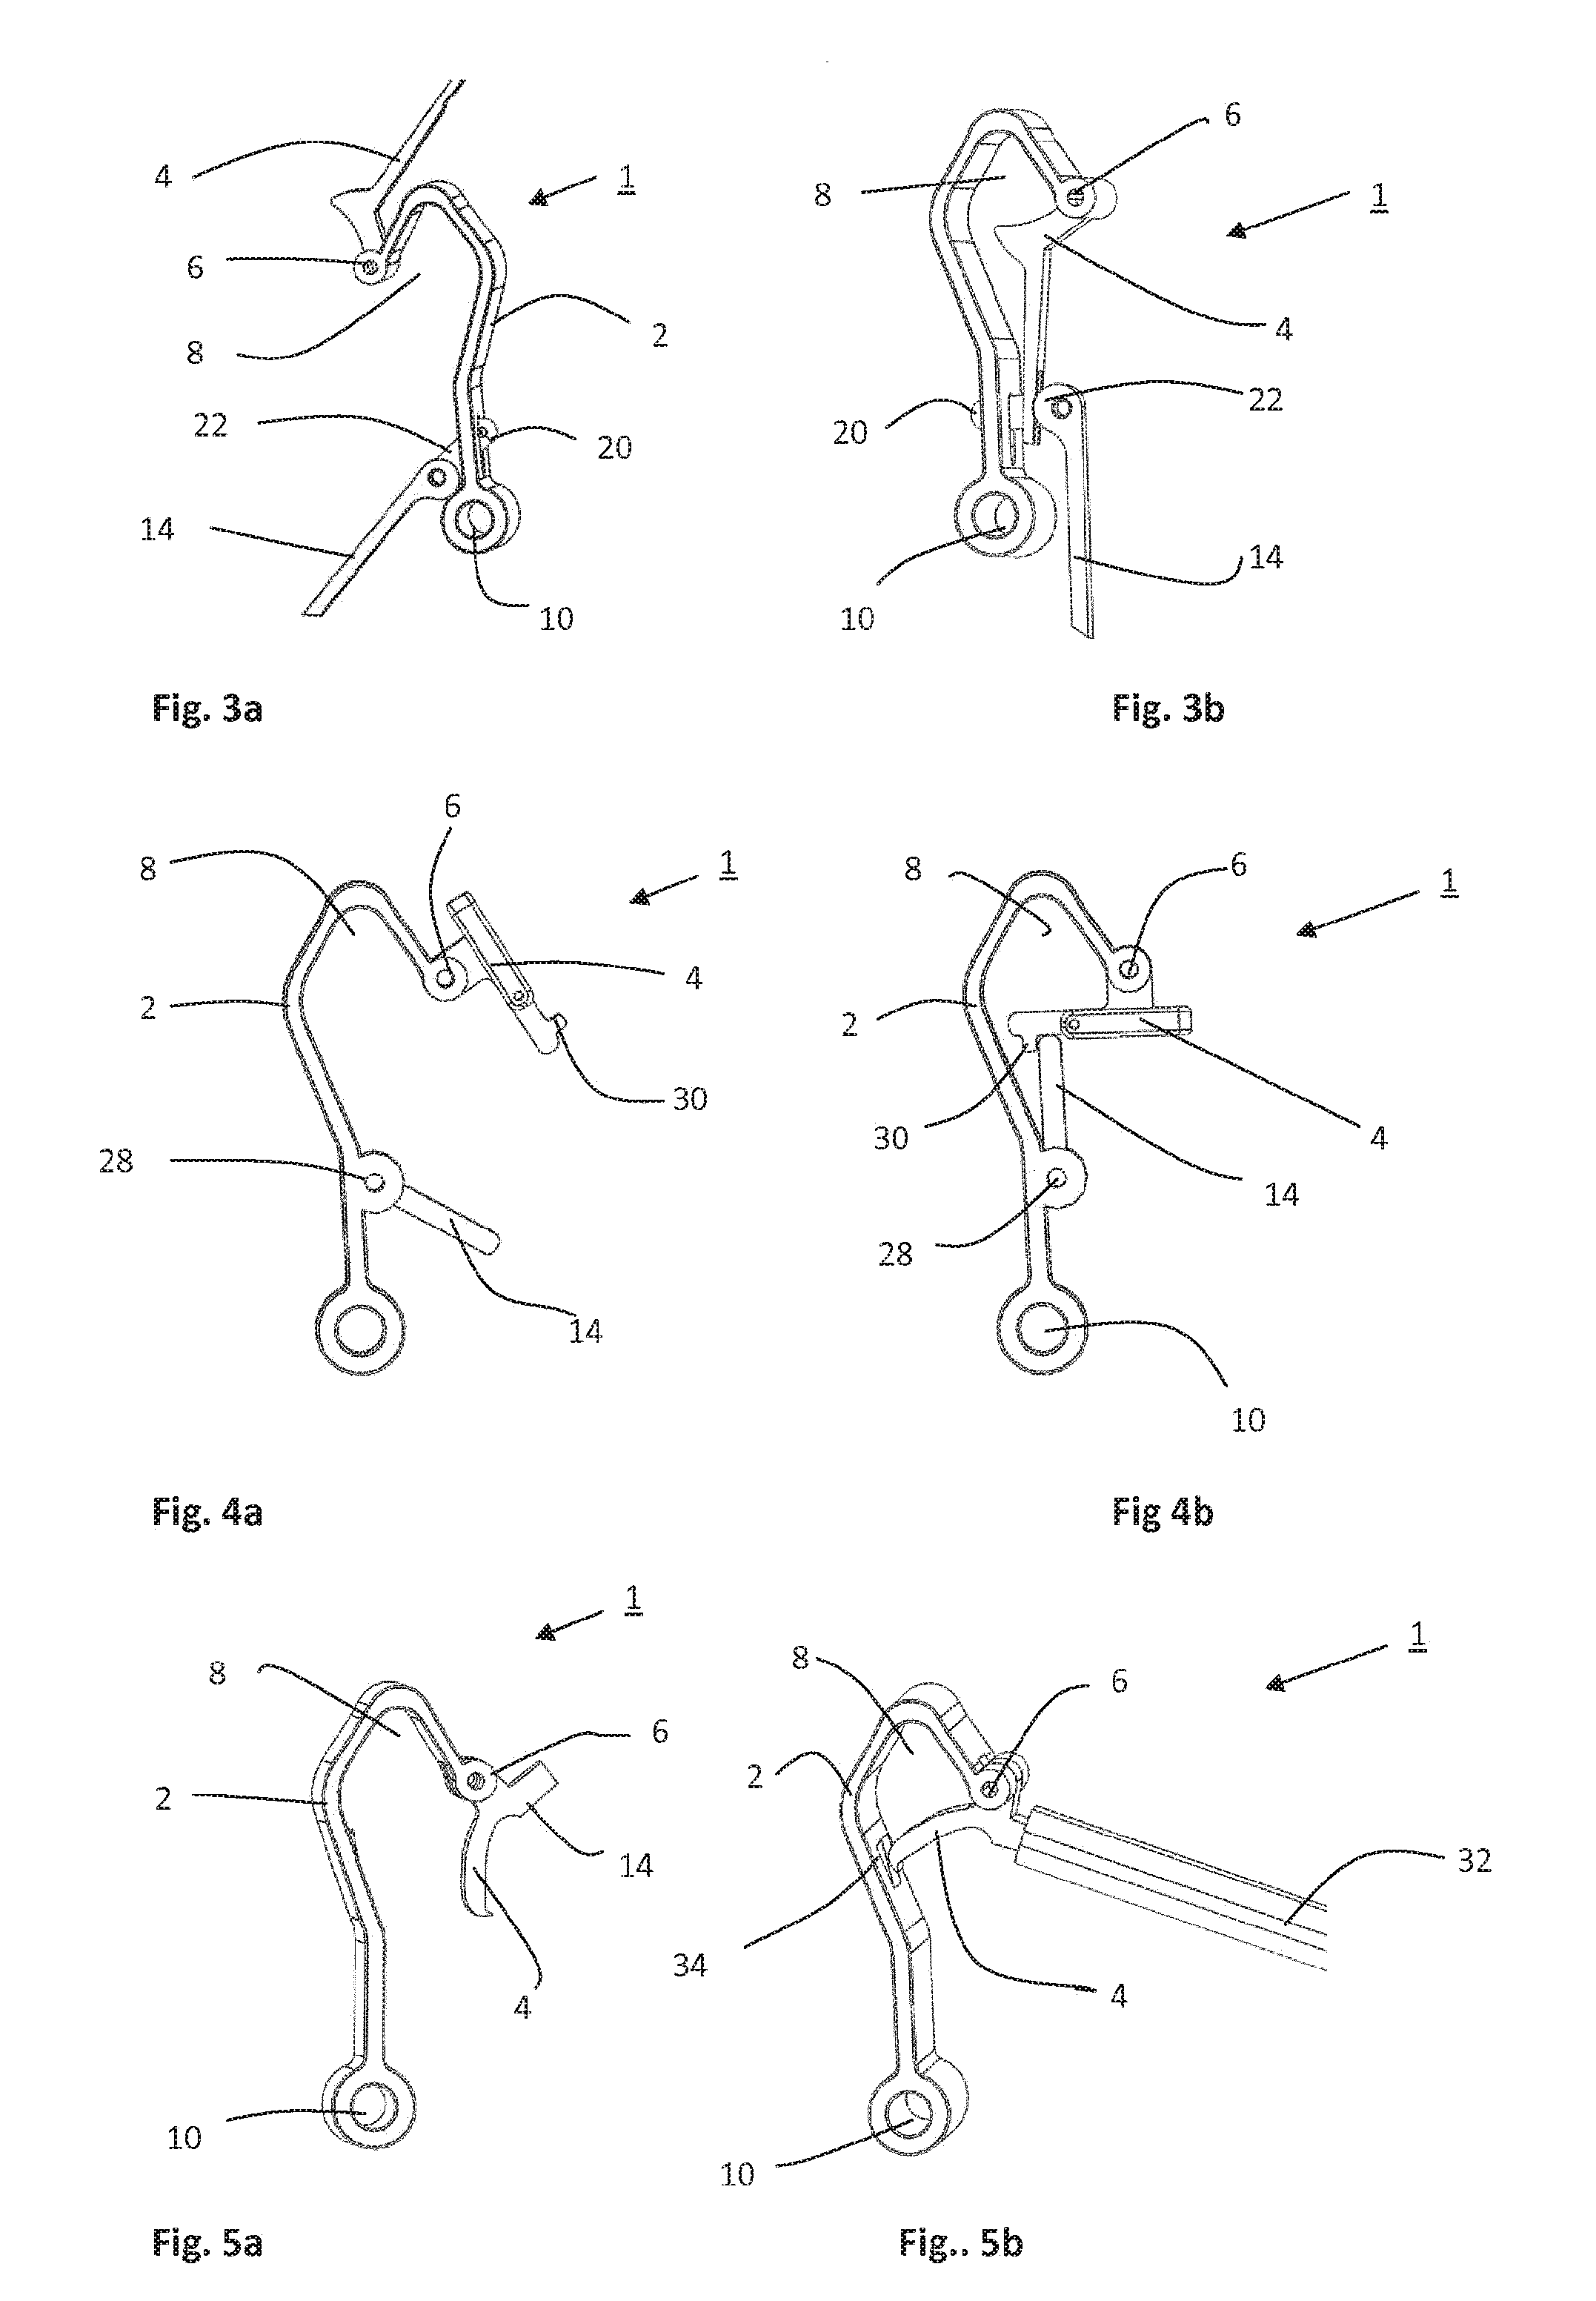 Method for securing a securing clamp on a cable of an overhead transmission line, manipulator and securing clamp